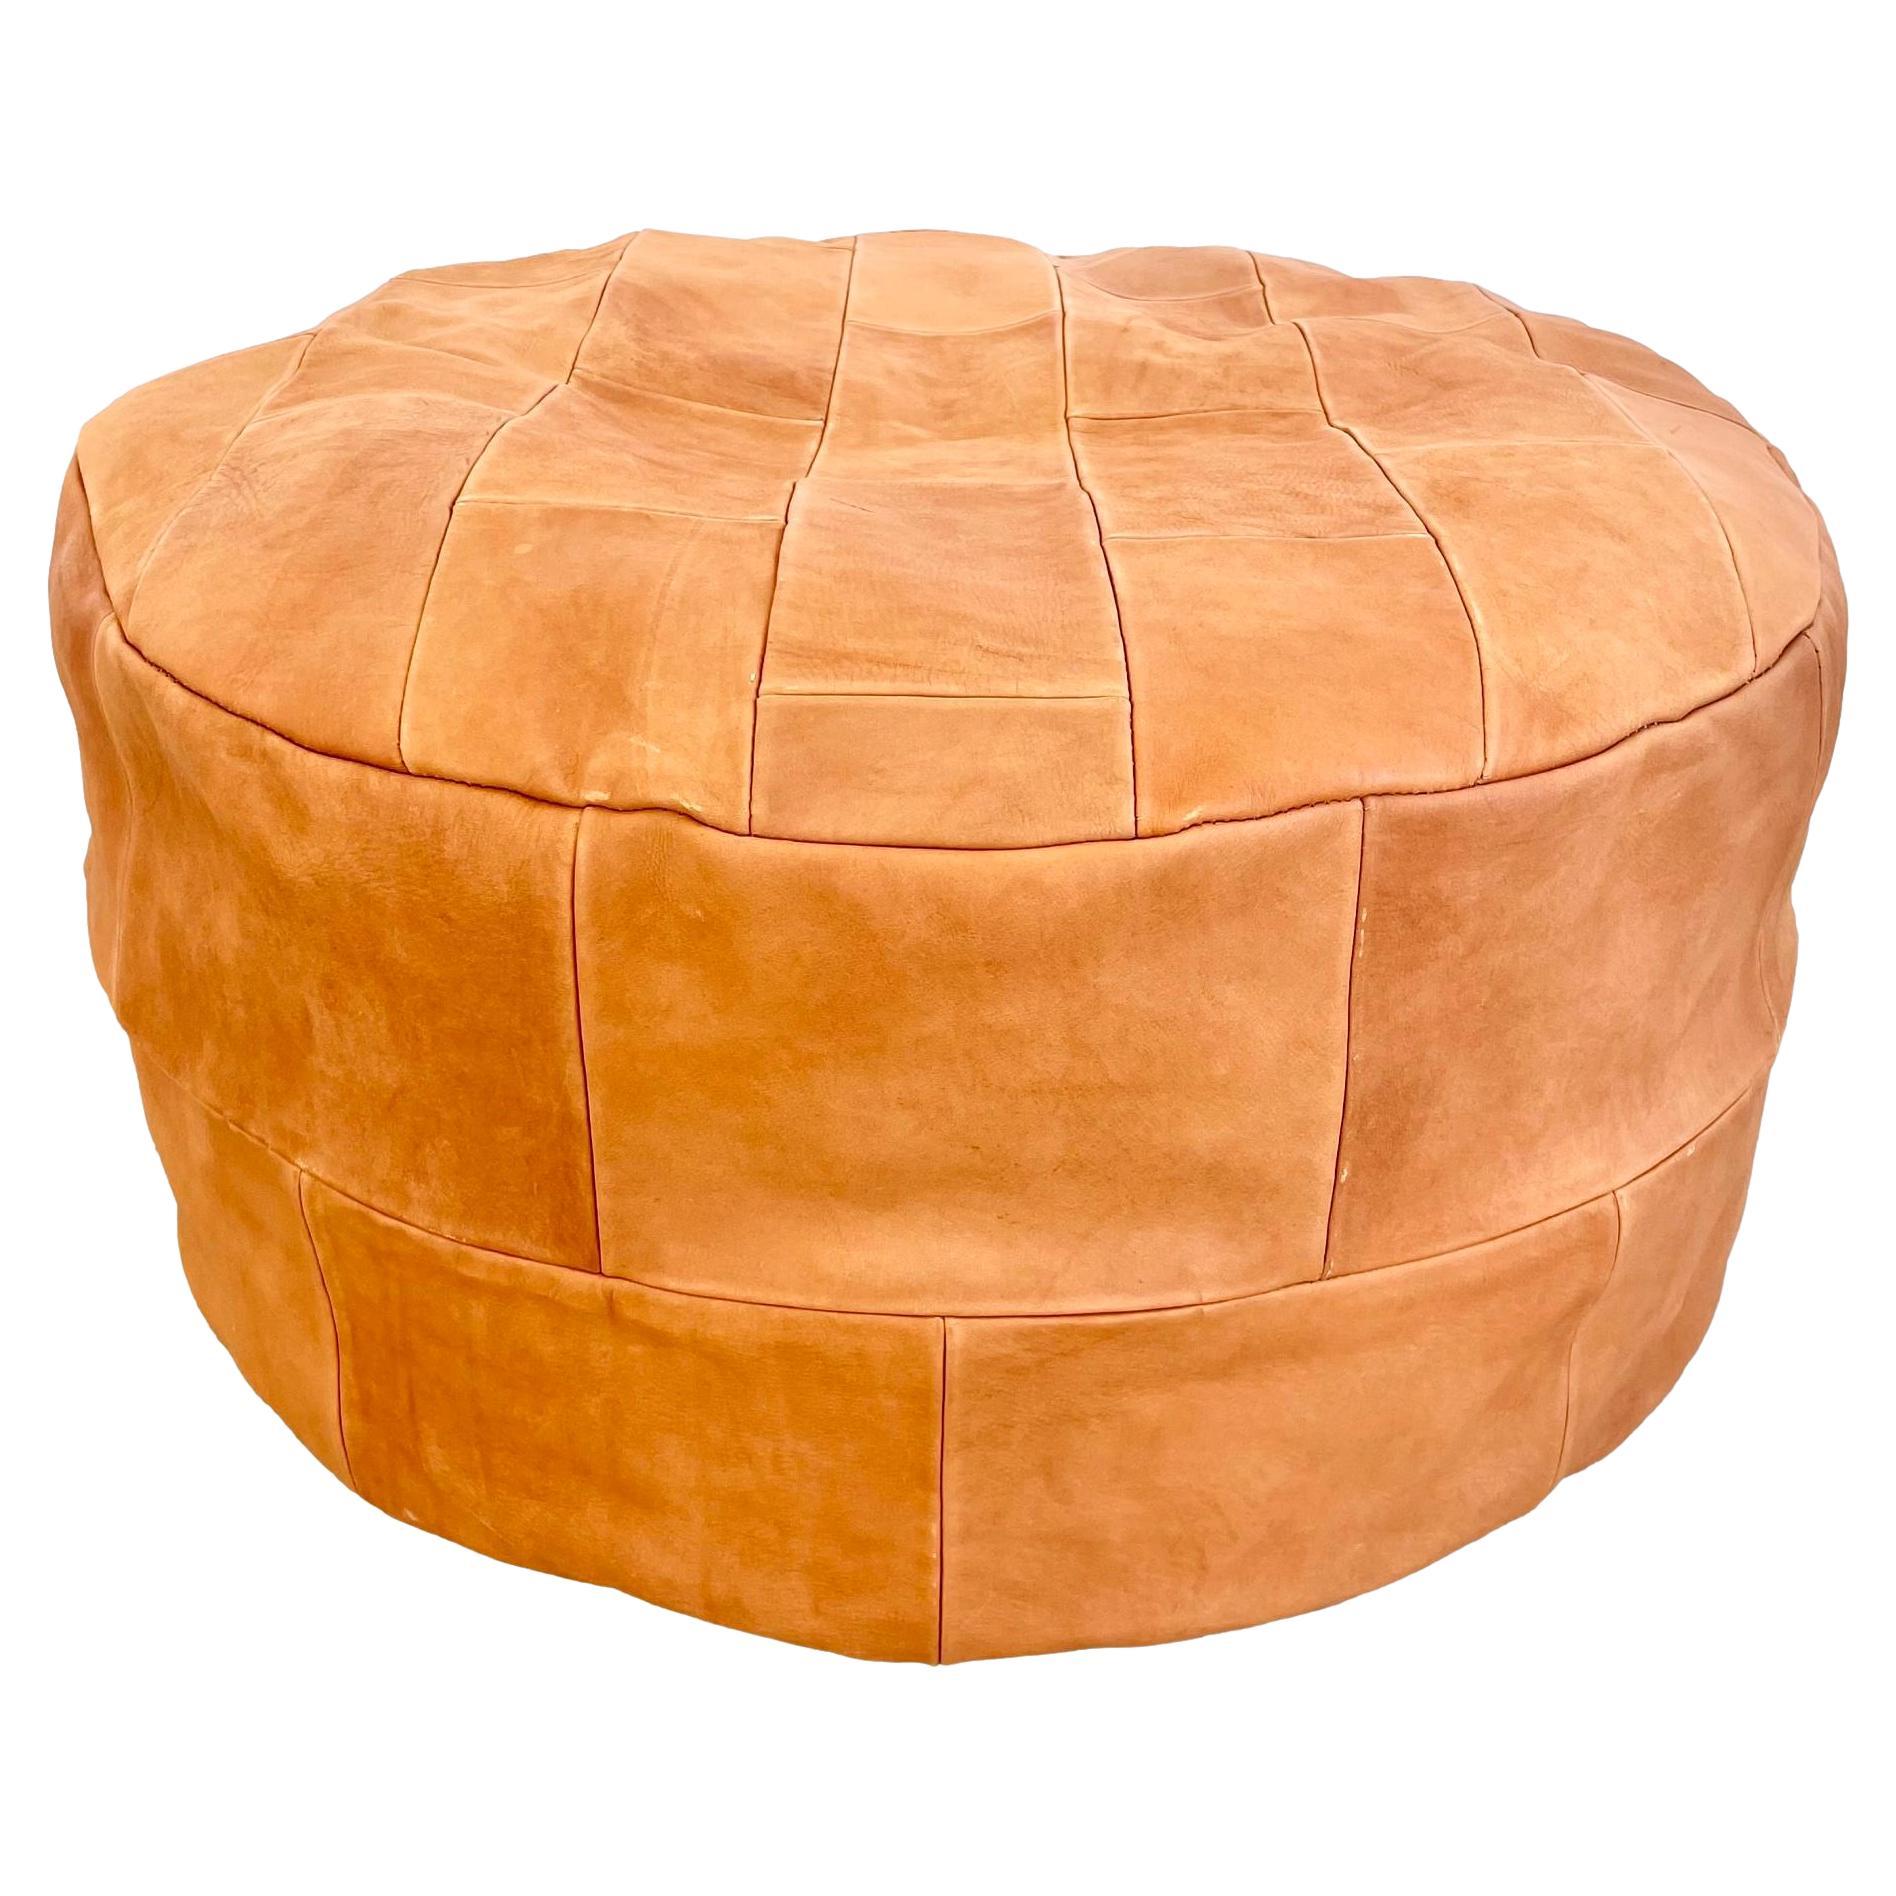 Patchwork Saddle Leather Pouf, Morocco For Sale